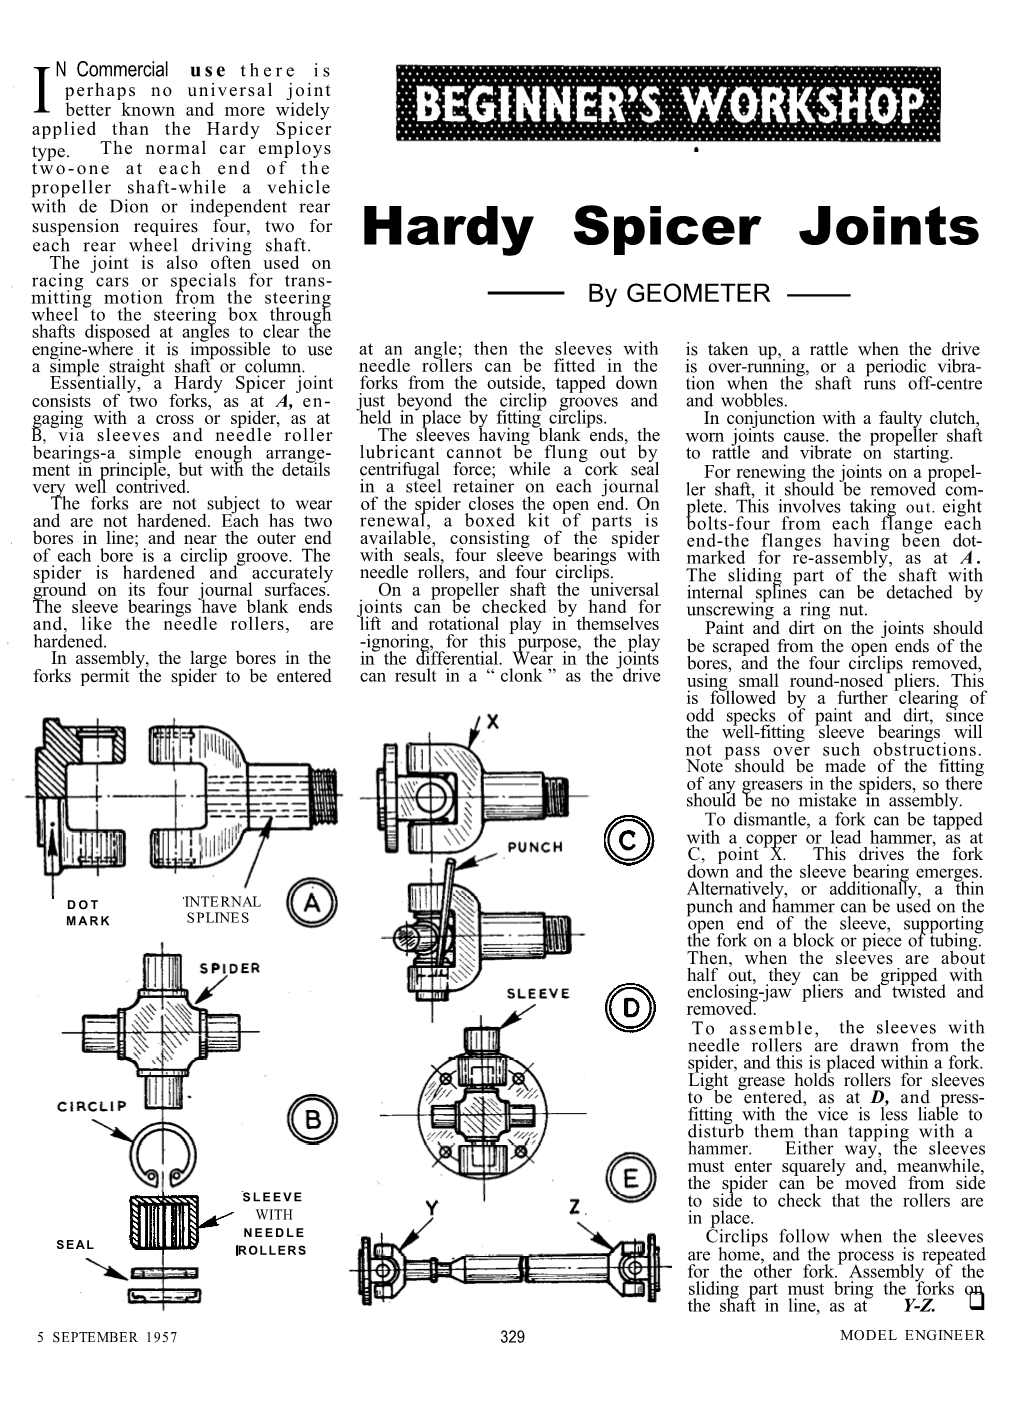 Hardy Spicer Joints